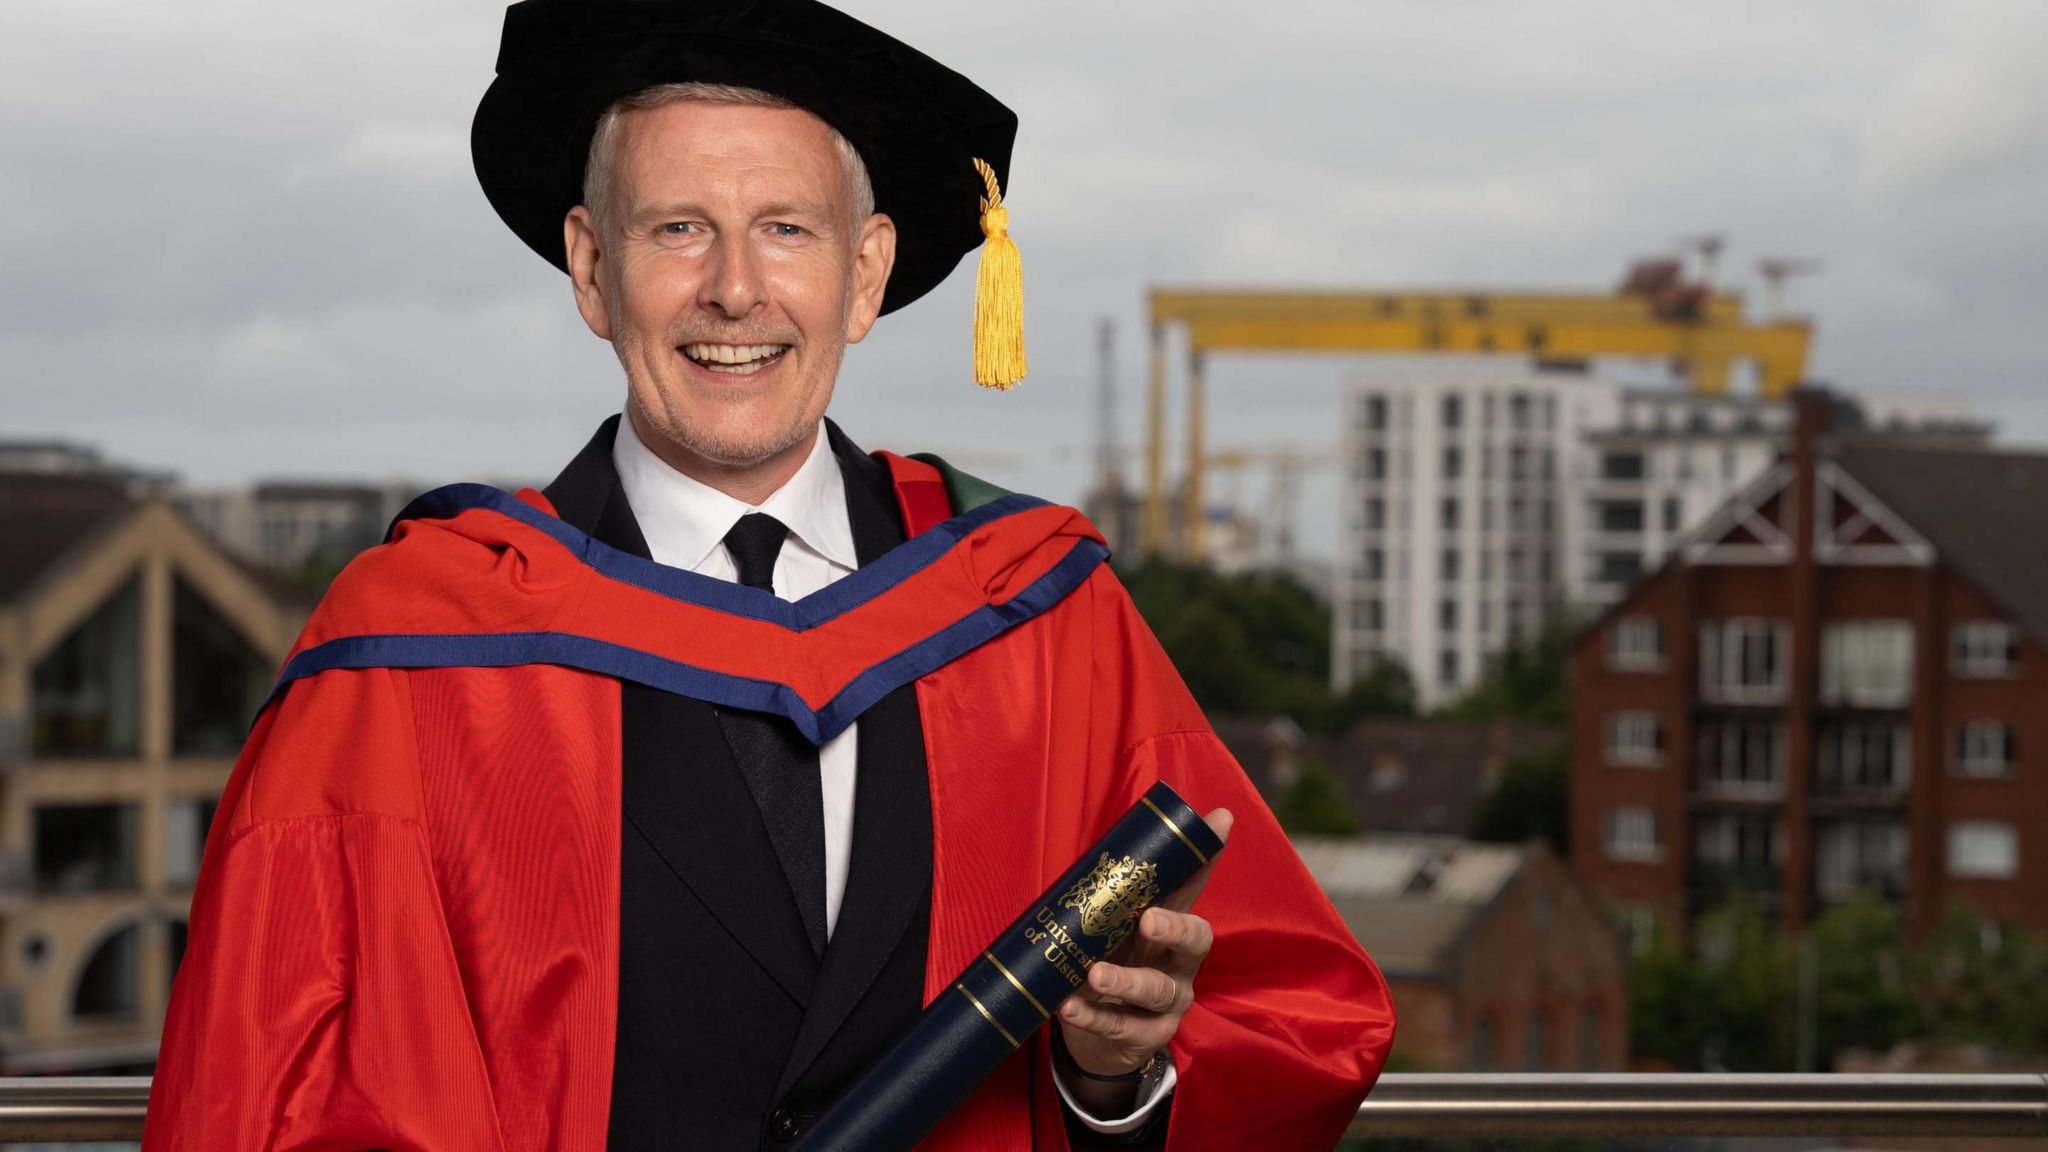 Undated Ulster University handout photo of Patrick Kielty, after being awarded an honorary doctorate from Ulster University